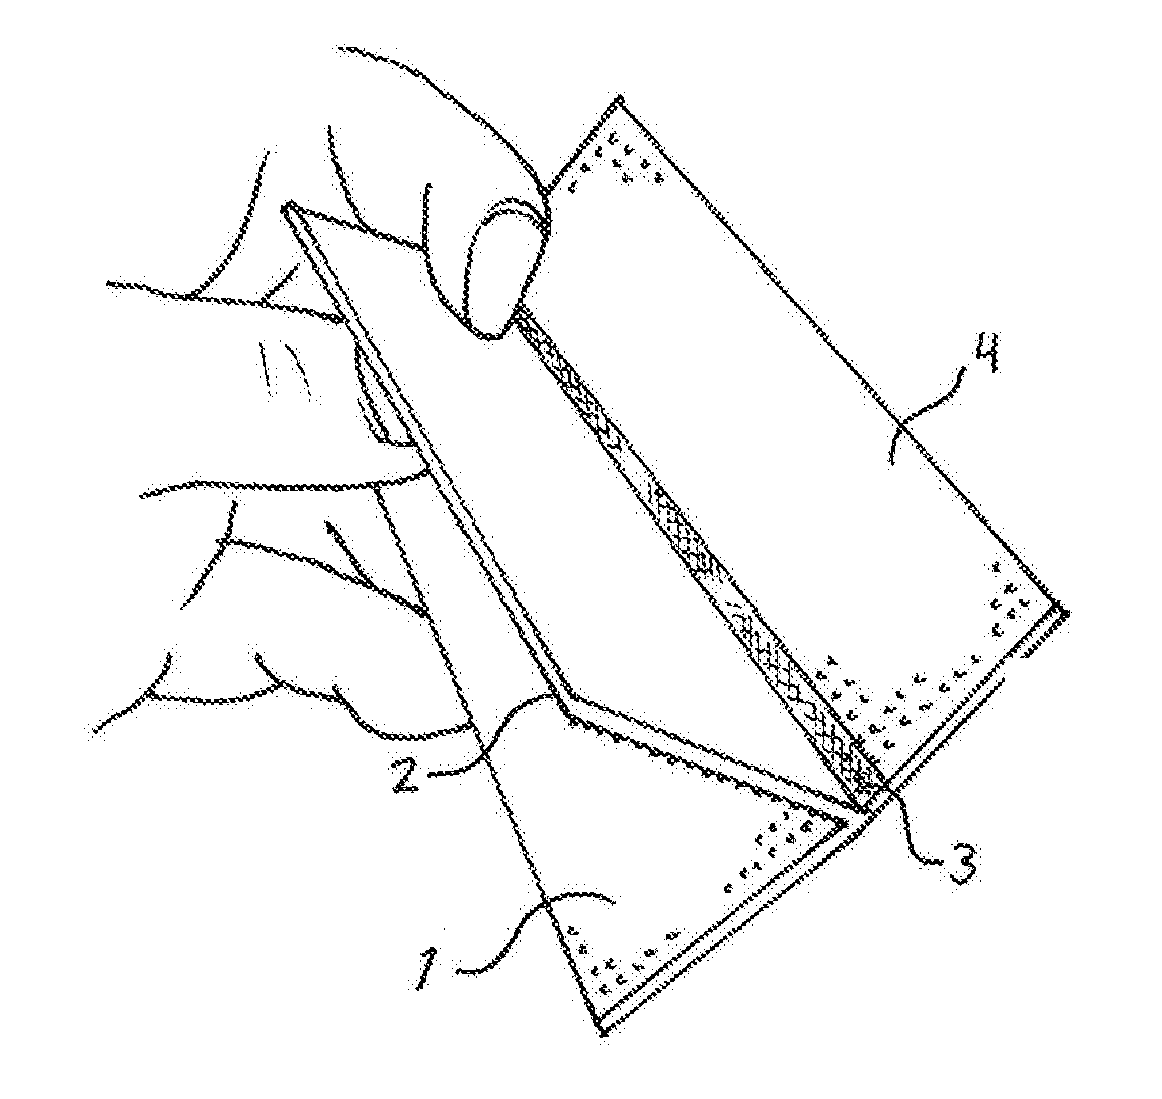 A bandage securing device